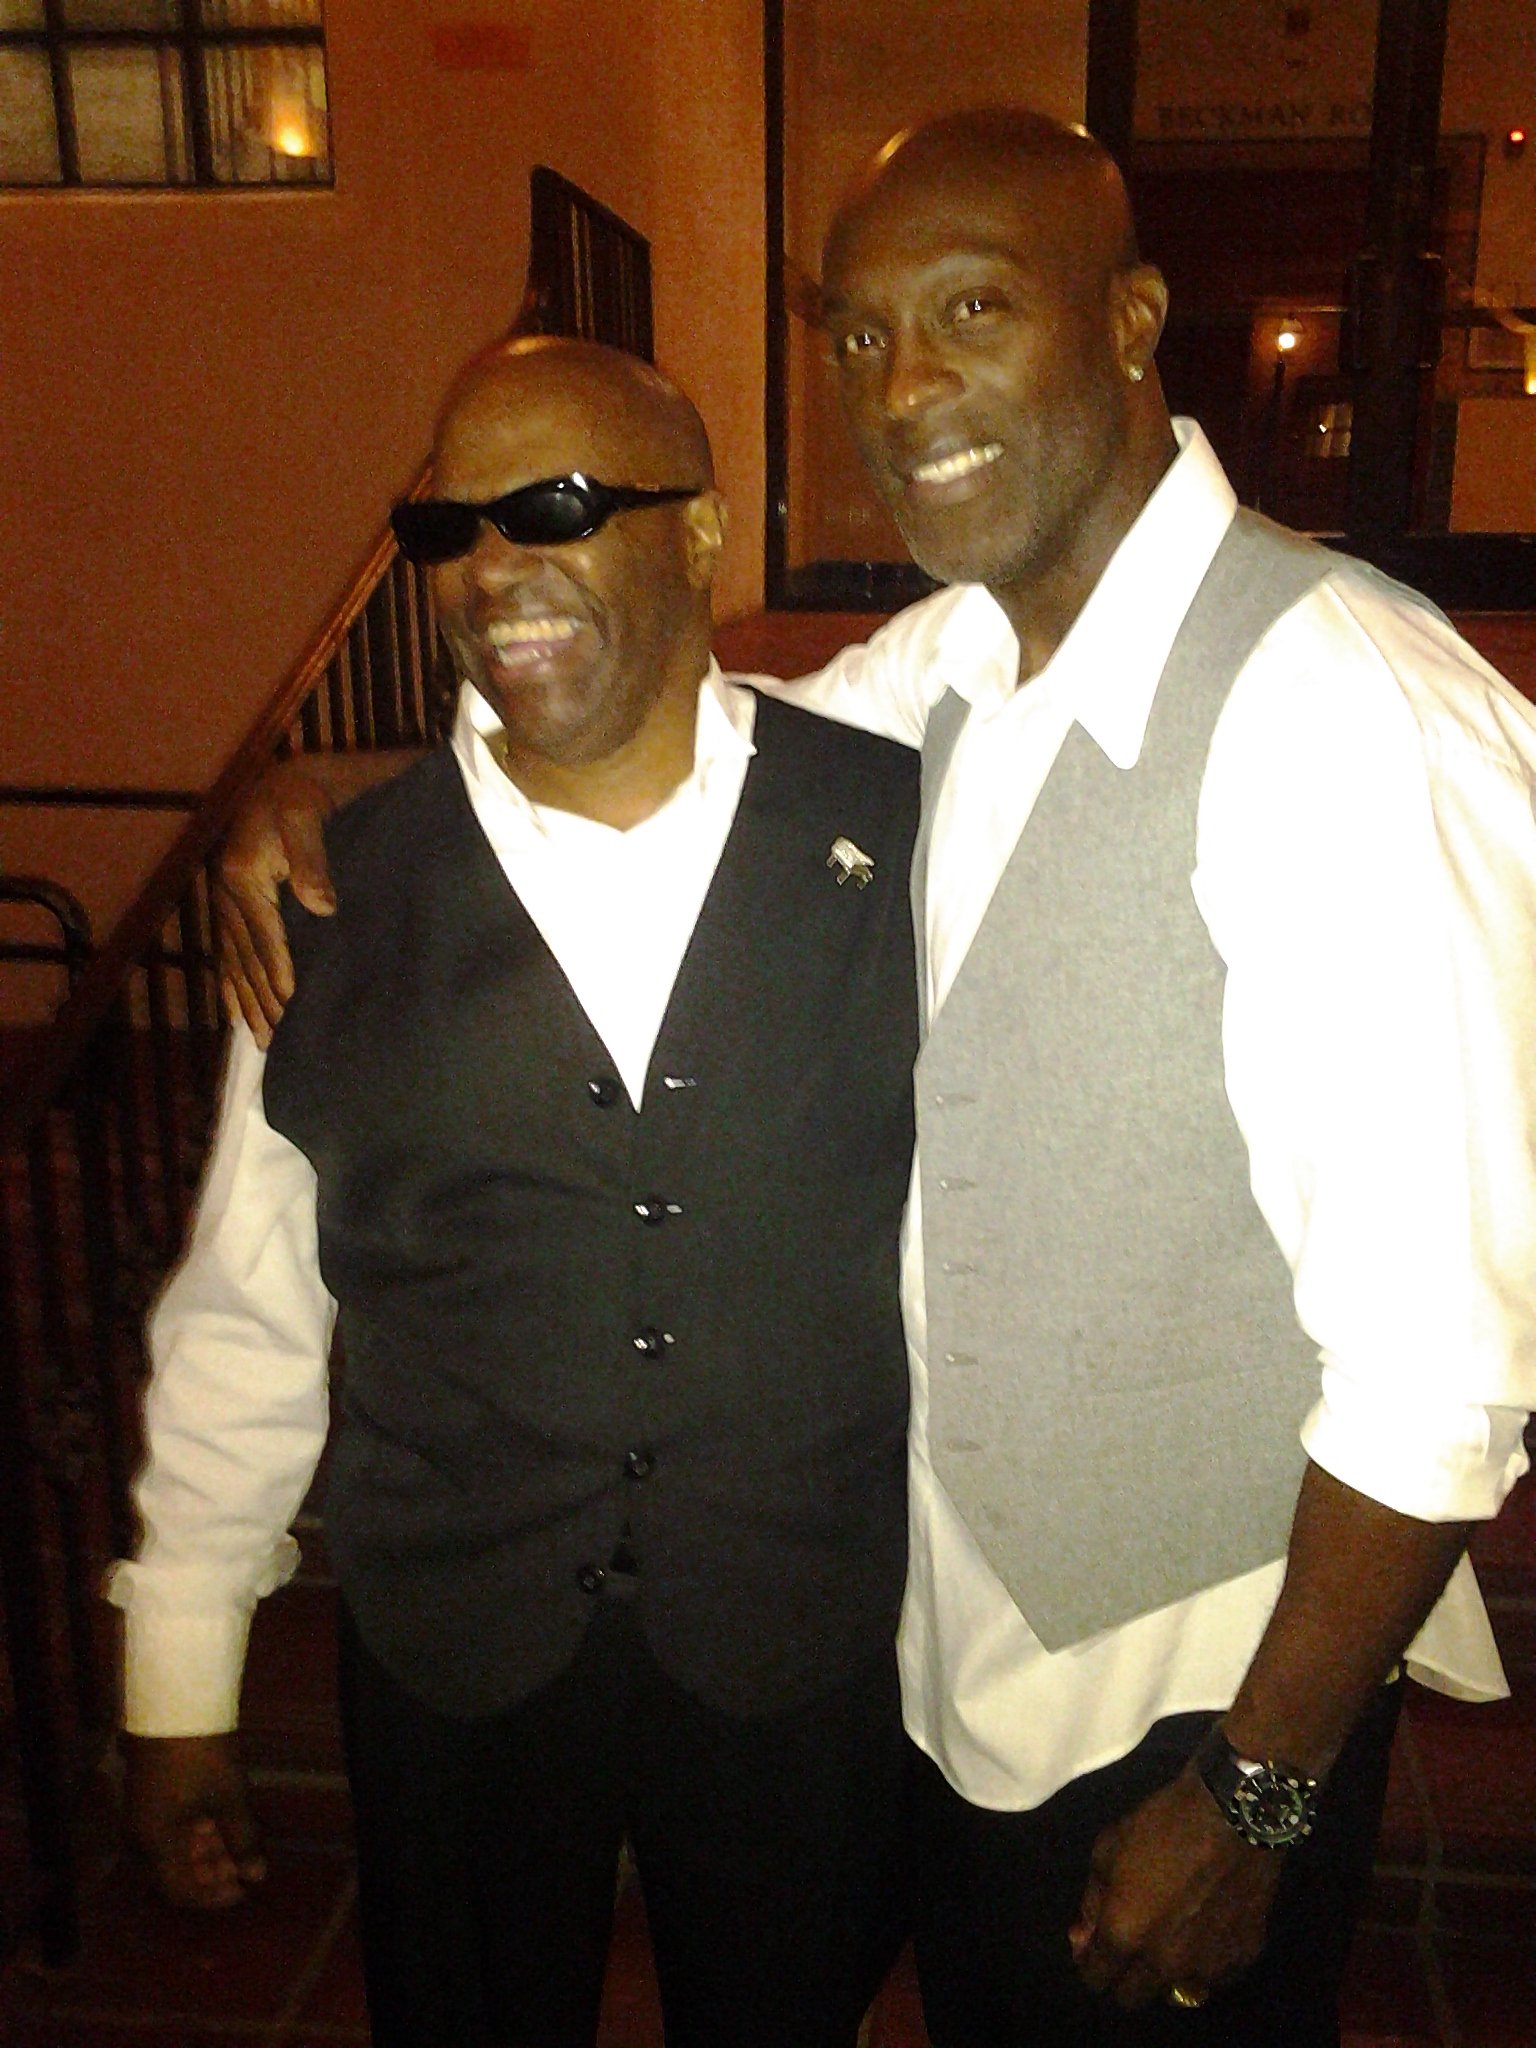 Ro Brooks and Ellis Hall (Ray Charles' protege') after his concert at Cal Tech/Beckman Hall